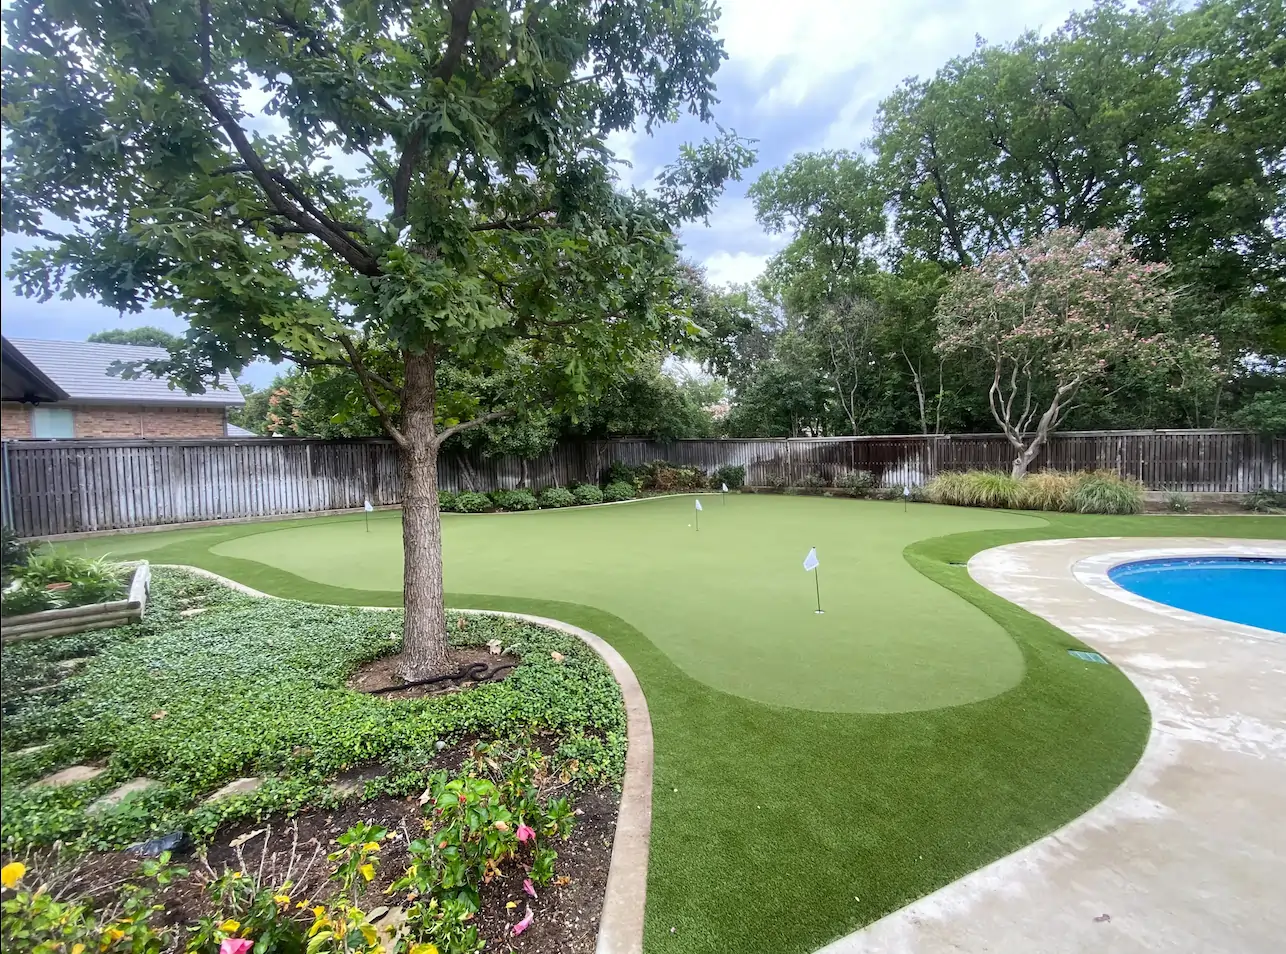 residential putting green